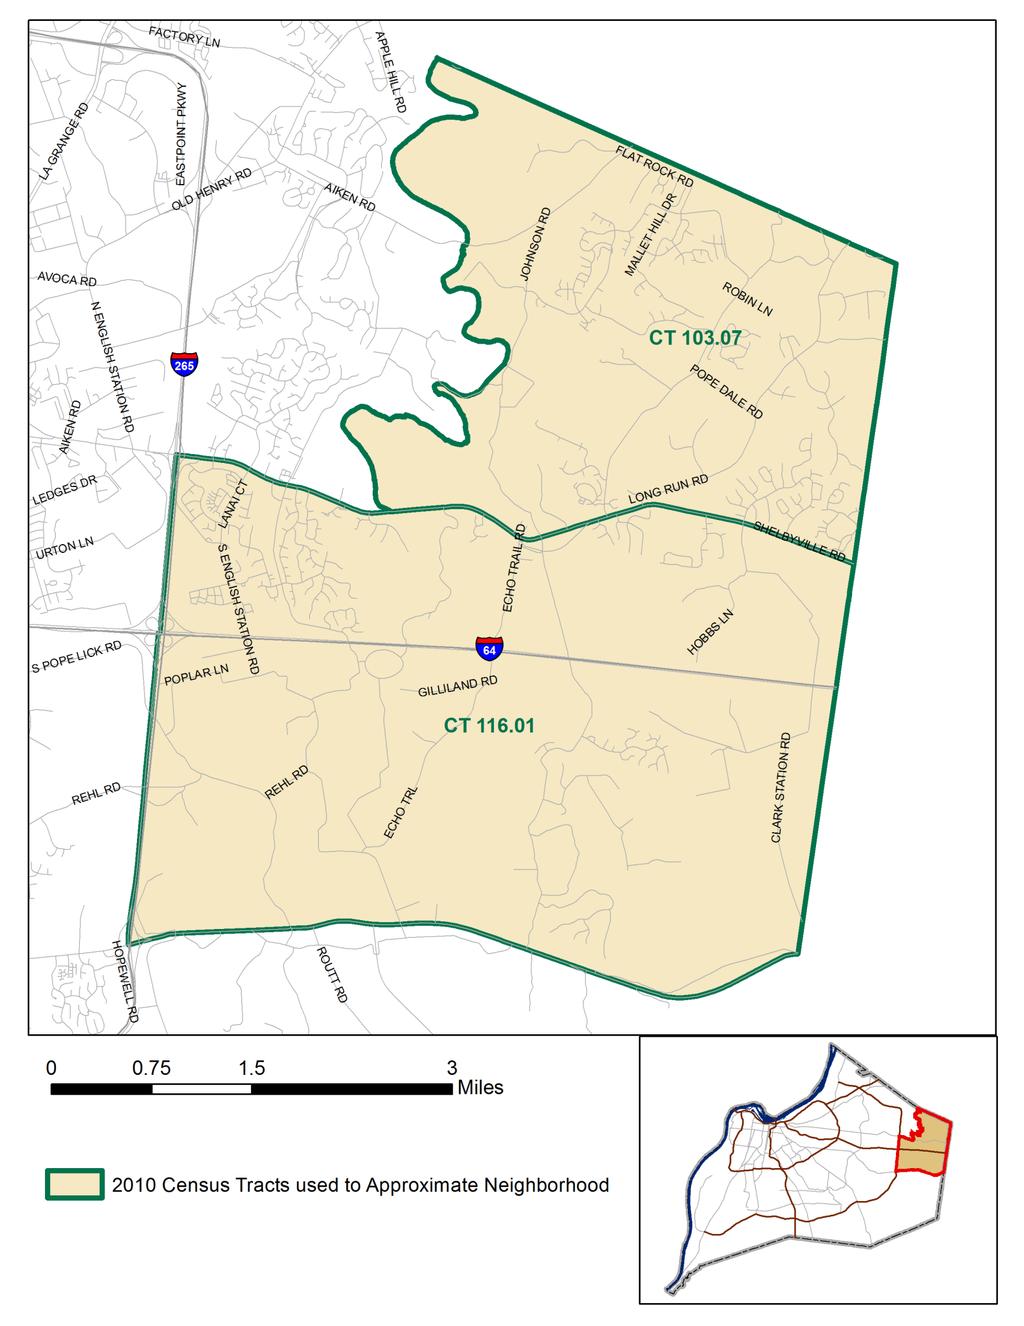 the 2000 Census have been defined by groups of census tracts, and named after a prominent road or feature in the area.